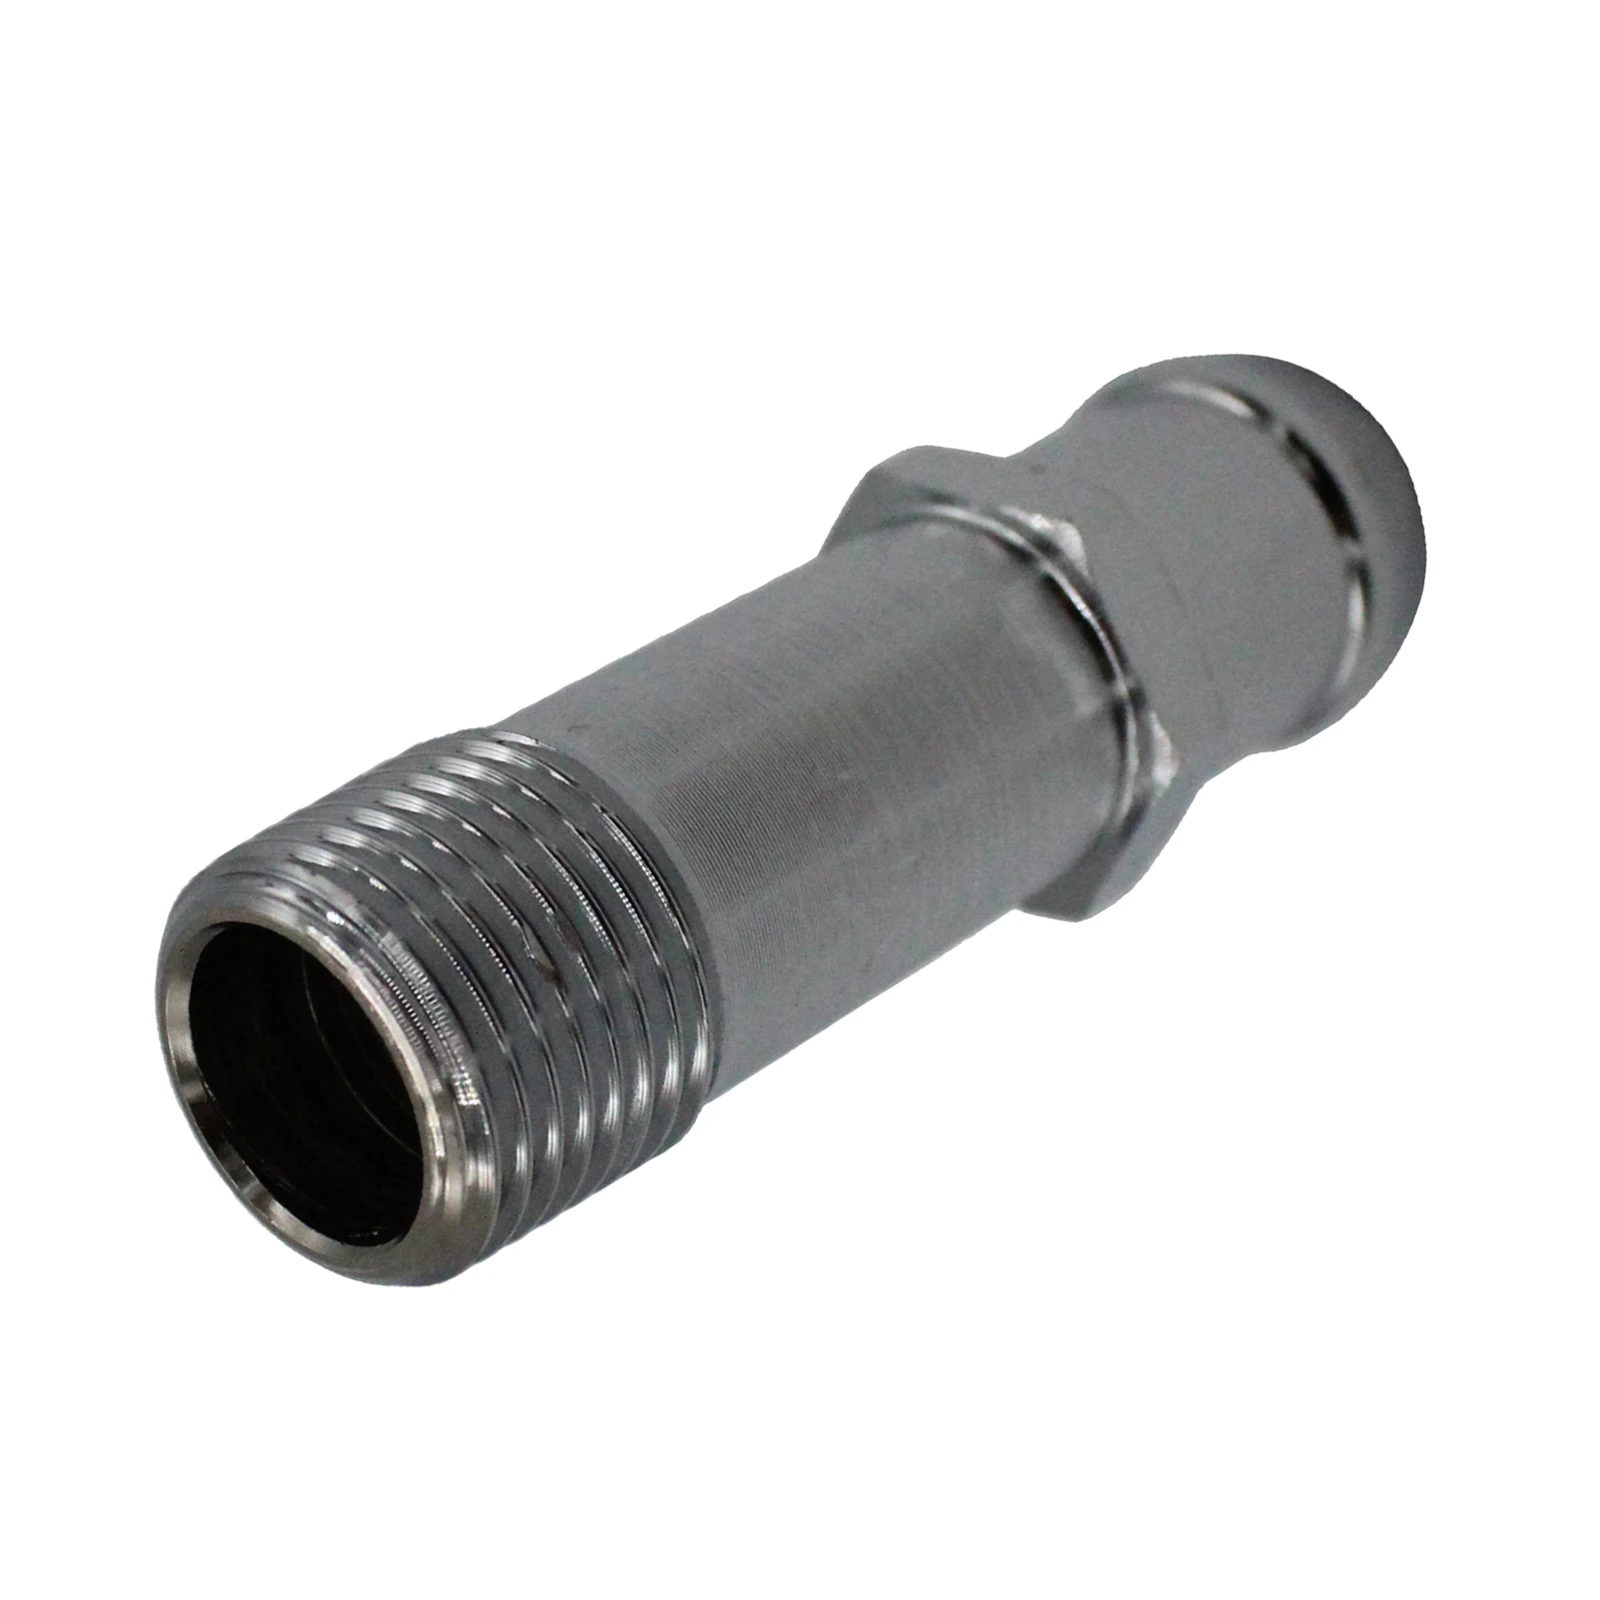 High-quality General Heater Hose Adapter for Fits  8  Motors